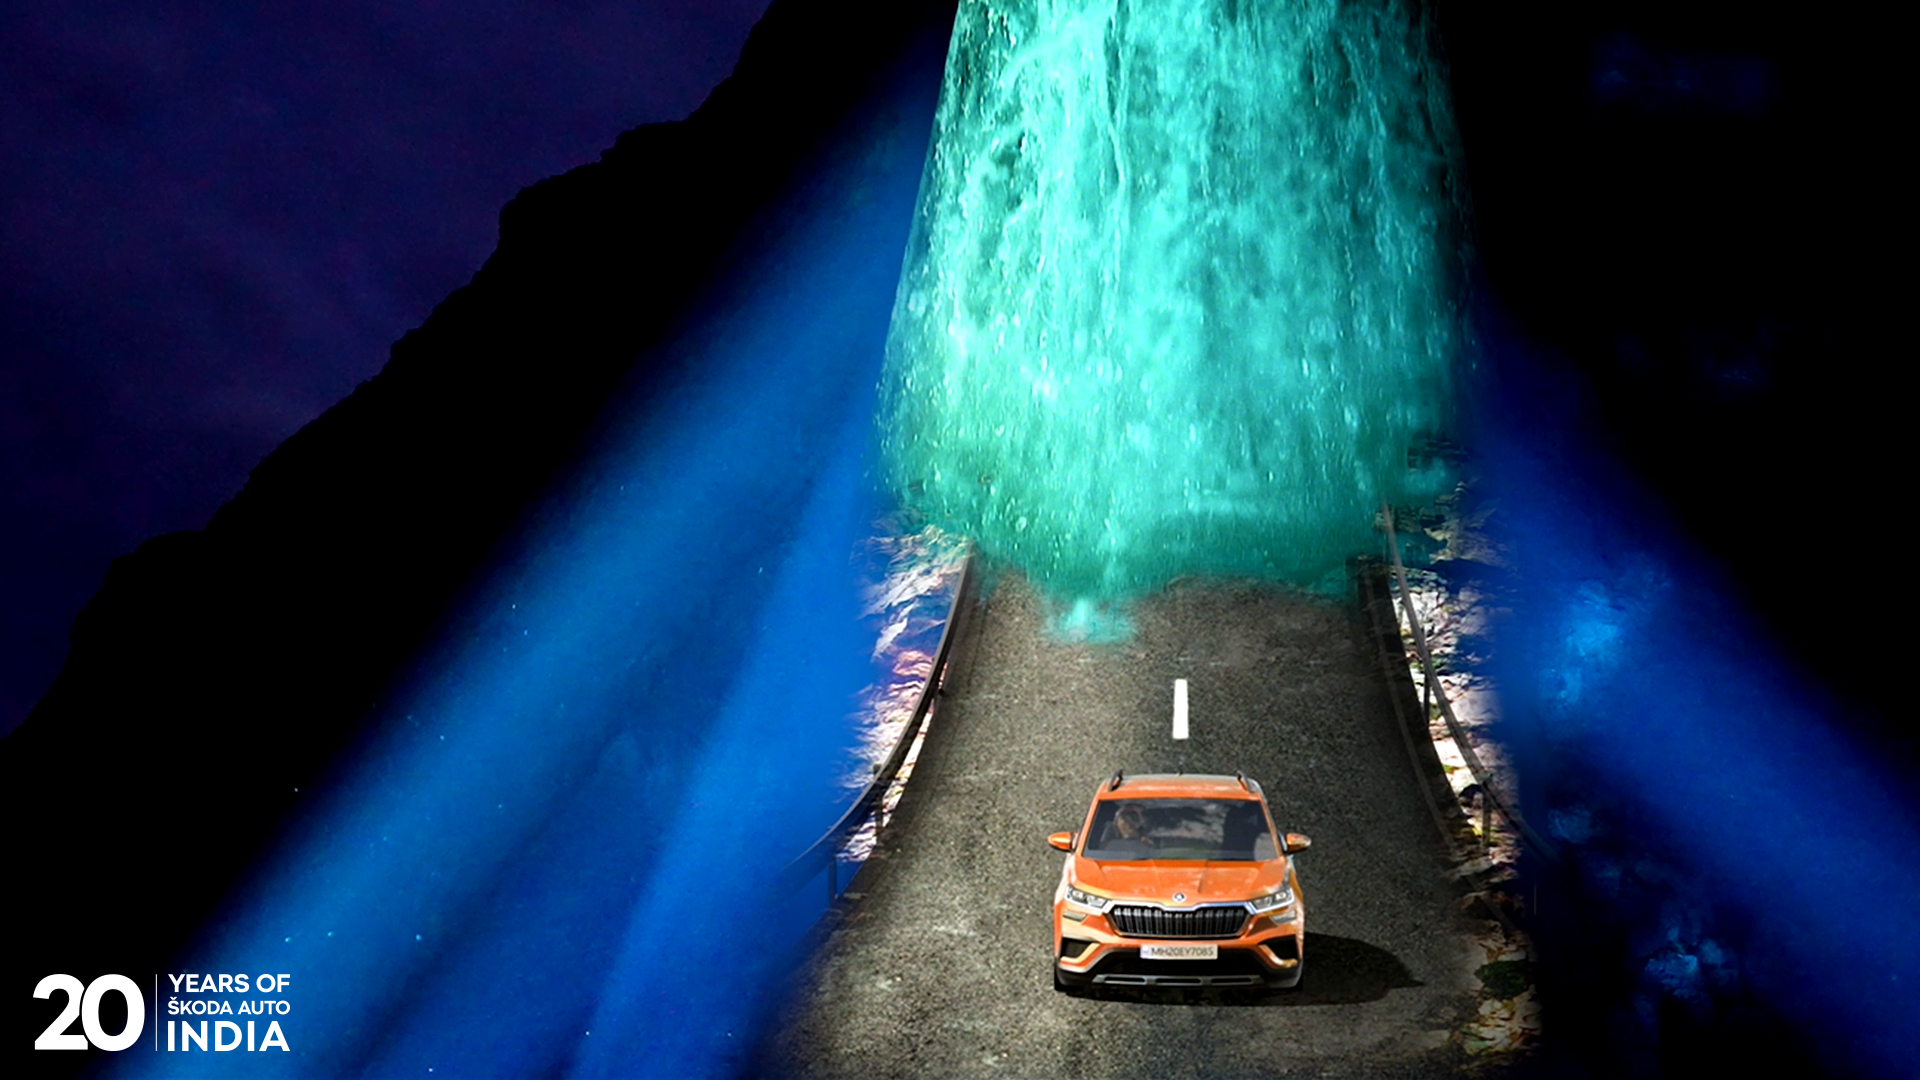 Skoda Celebrates 20 Years In India! Highest 3D Projection In The Country At Rohtang pass